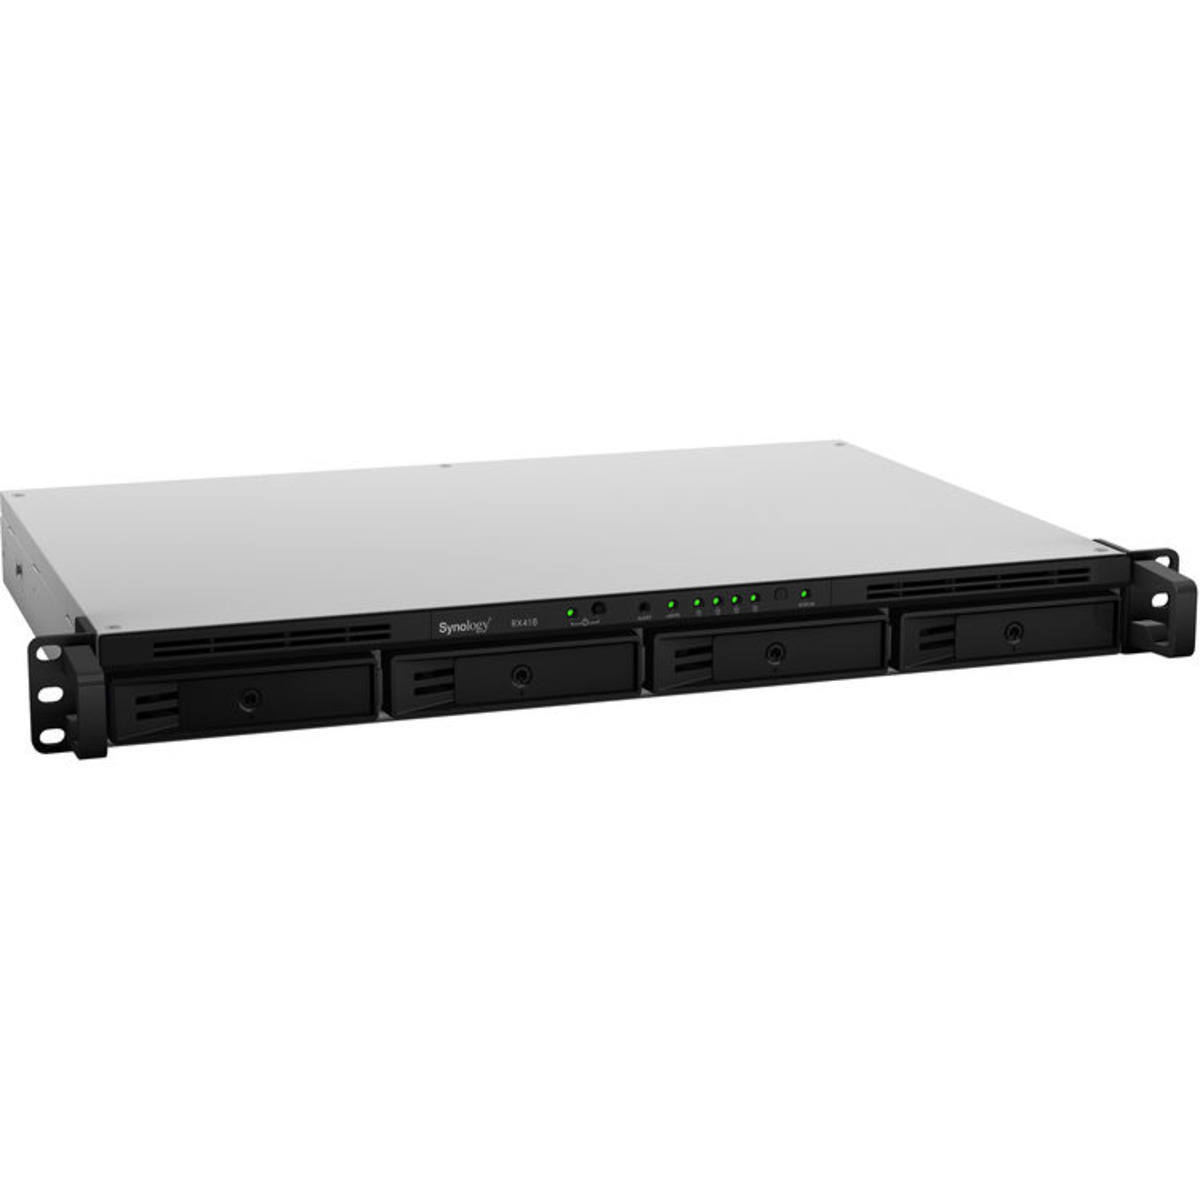 Synology RX418 External Expansion Drive 16tb 4-Bay RackMount Multimedia / Power User / Business Expansion Enclosure 2x8tb Western Digital Ultrastar DC HC320 HUS728T8TALE6L4 3.5 7200rpm SATA 6Gb/s HDD ENTERPRISE Class Drives Installed - Burn-In Tested RX418 External Expansion Drive